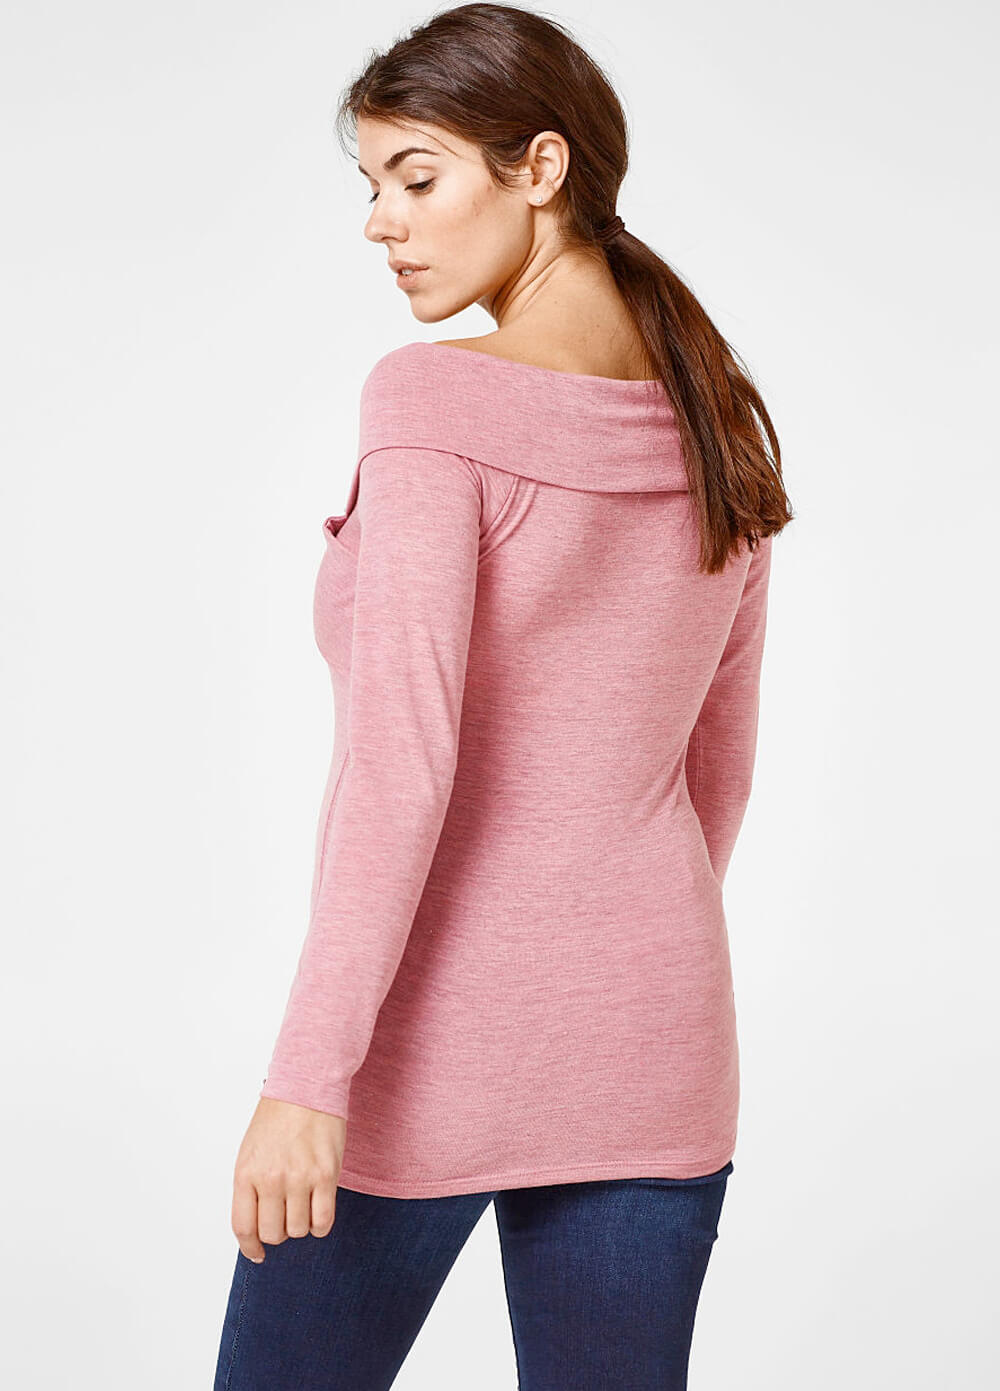 Off-Shoulder Maternity Top in Pink by Esprit